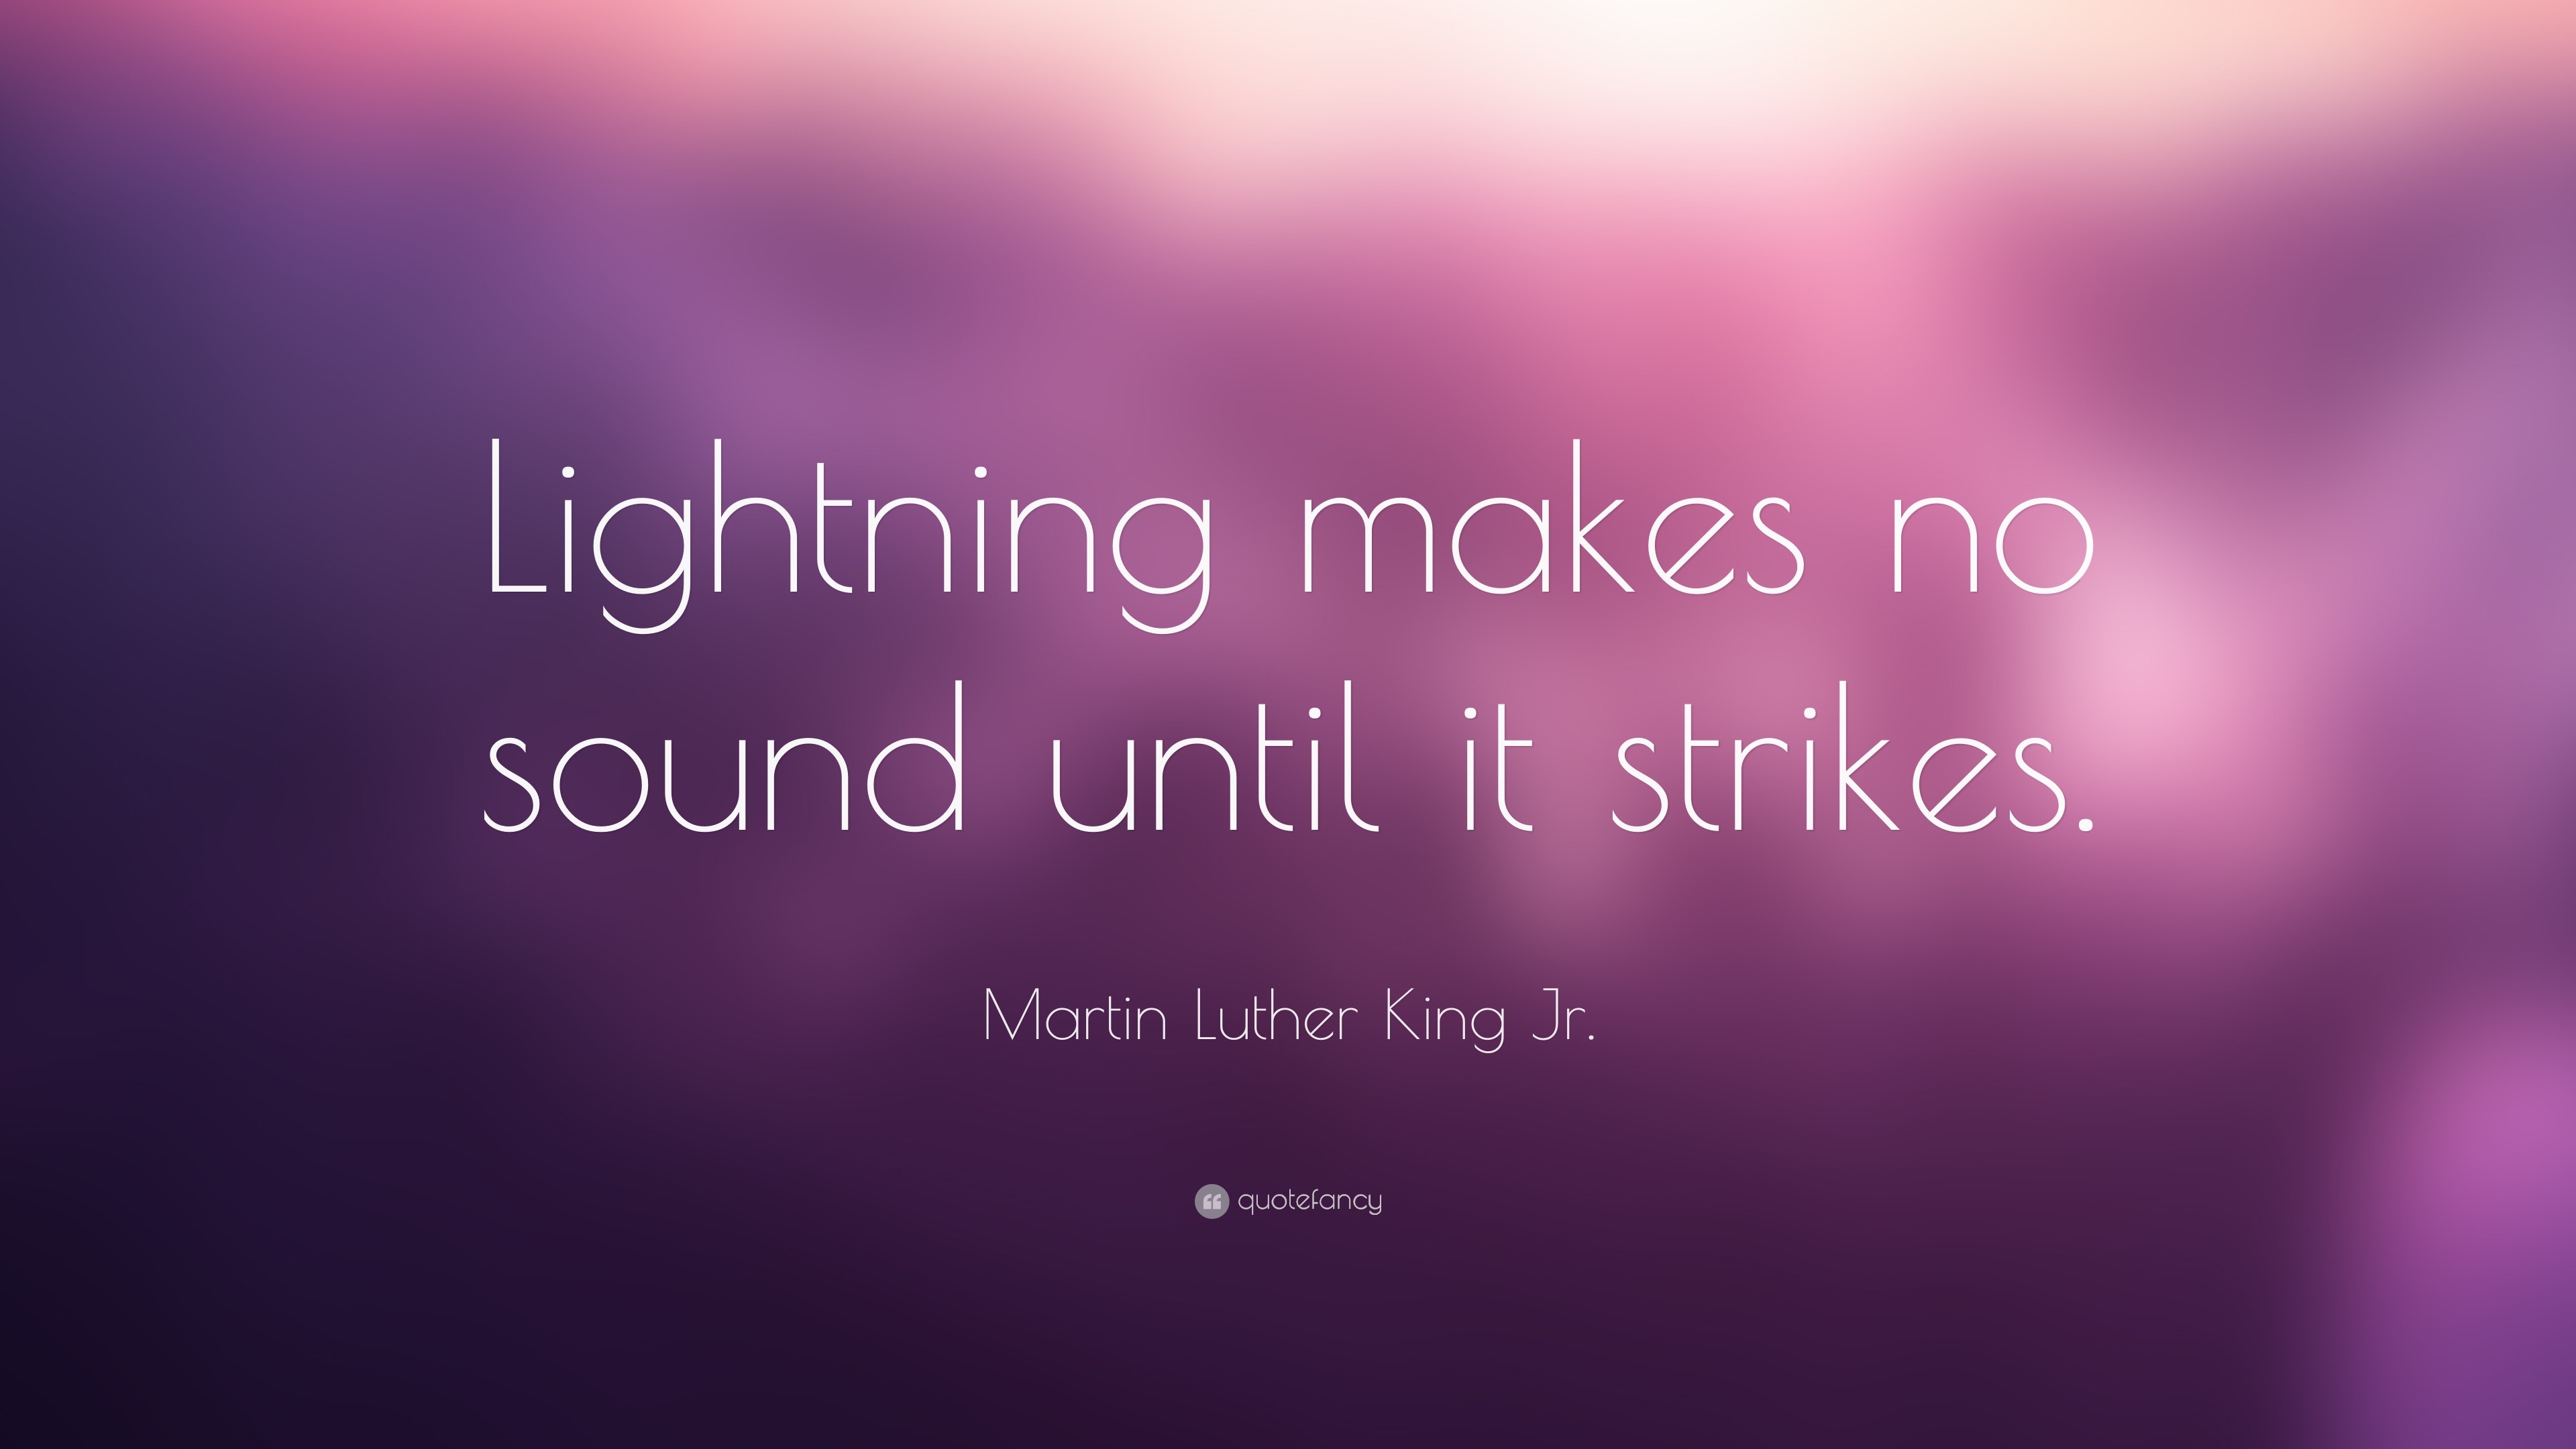 Martin Luther King Jr. Quote: “Lightning makes no sound until it strikes.”